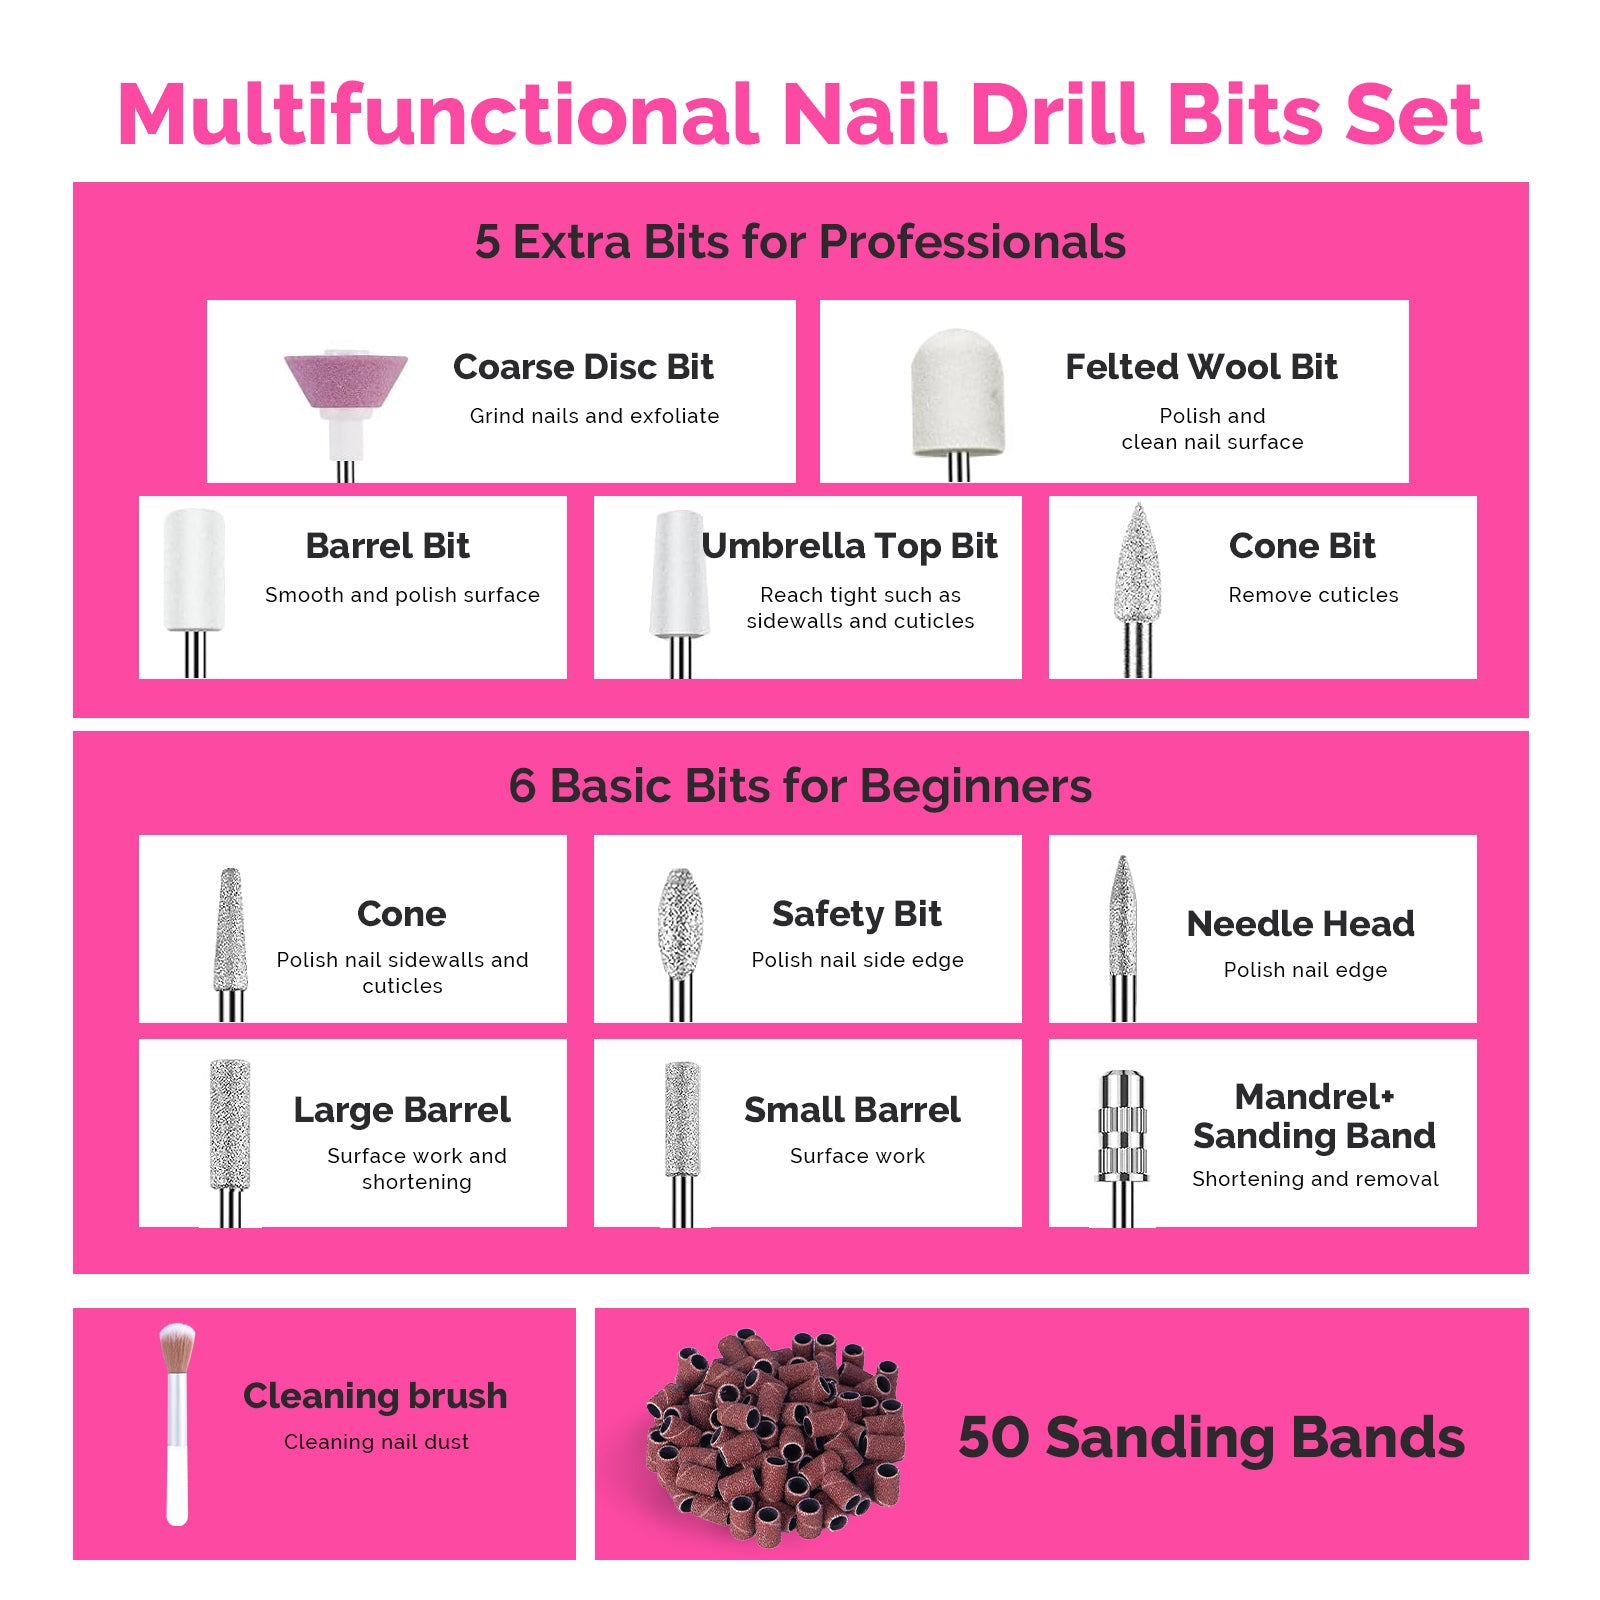 The Full Guide To Nail Drill Bits | Shape Explained